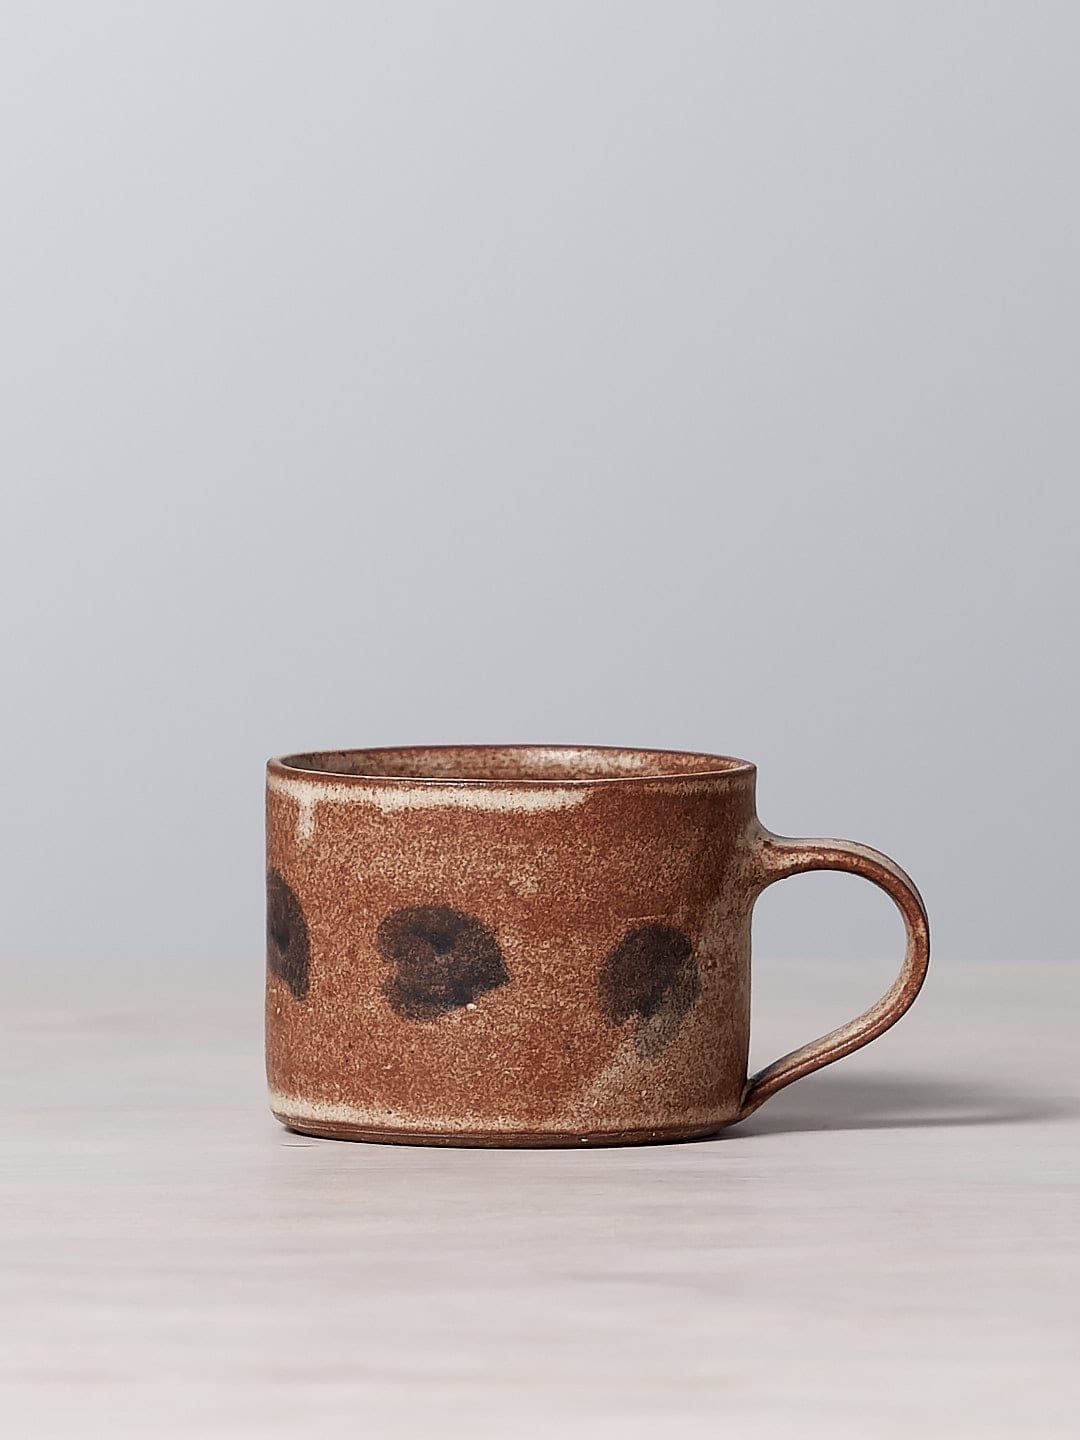 A brown Spots mug made of iron-rich clay with a matte cream glaze sits on a table.